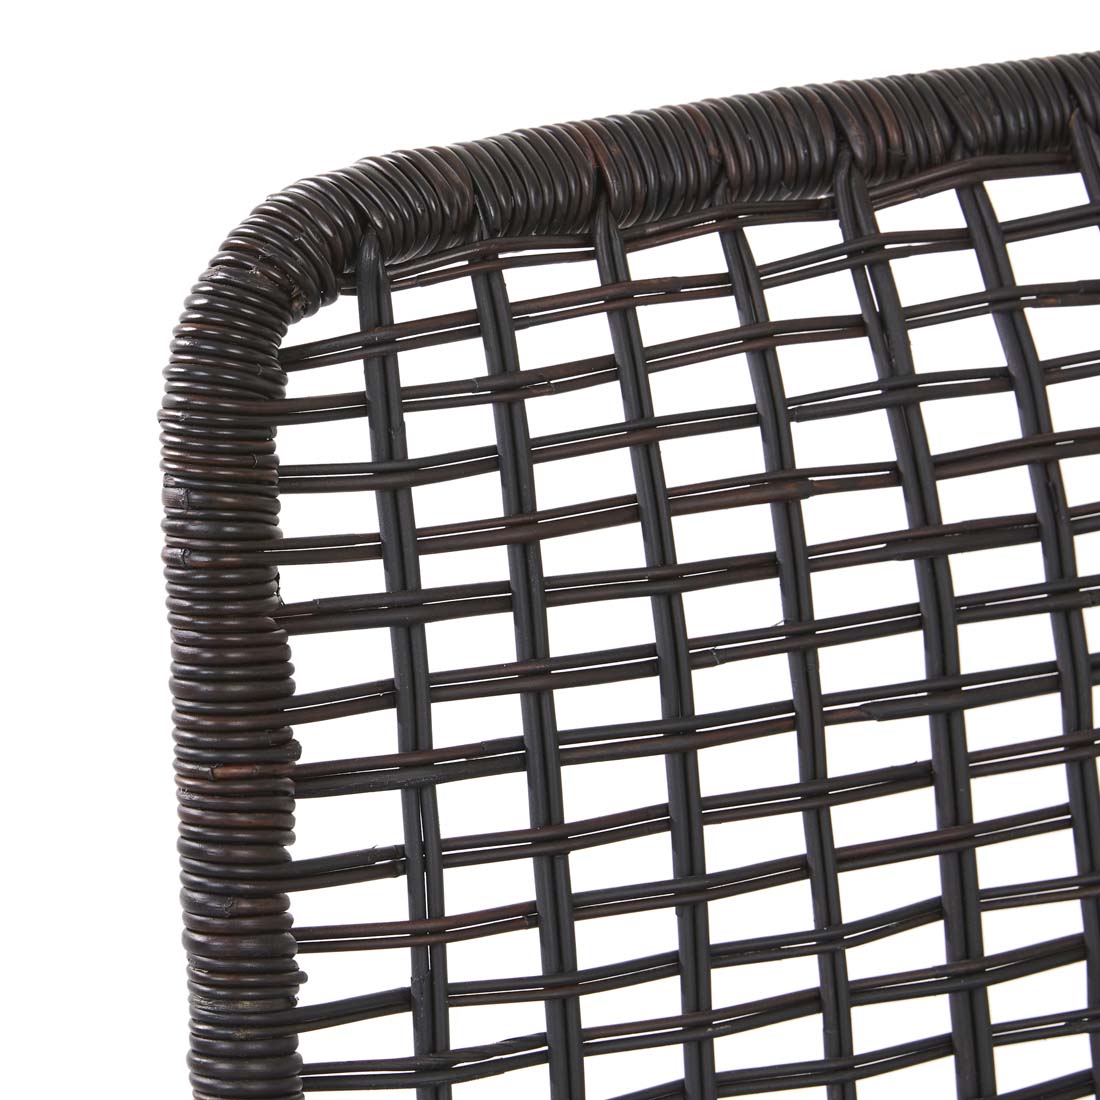 Olivia Open Weave Dining Chair image 1